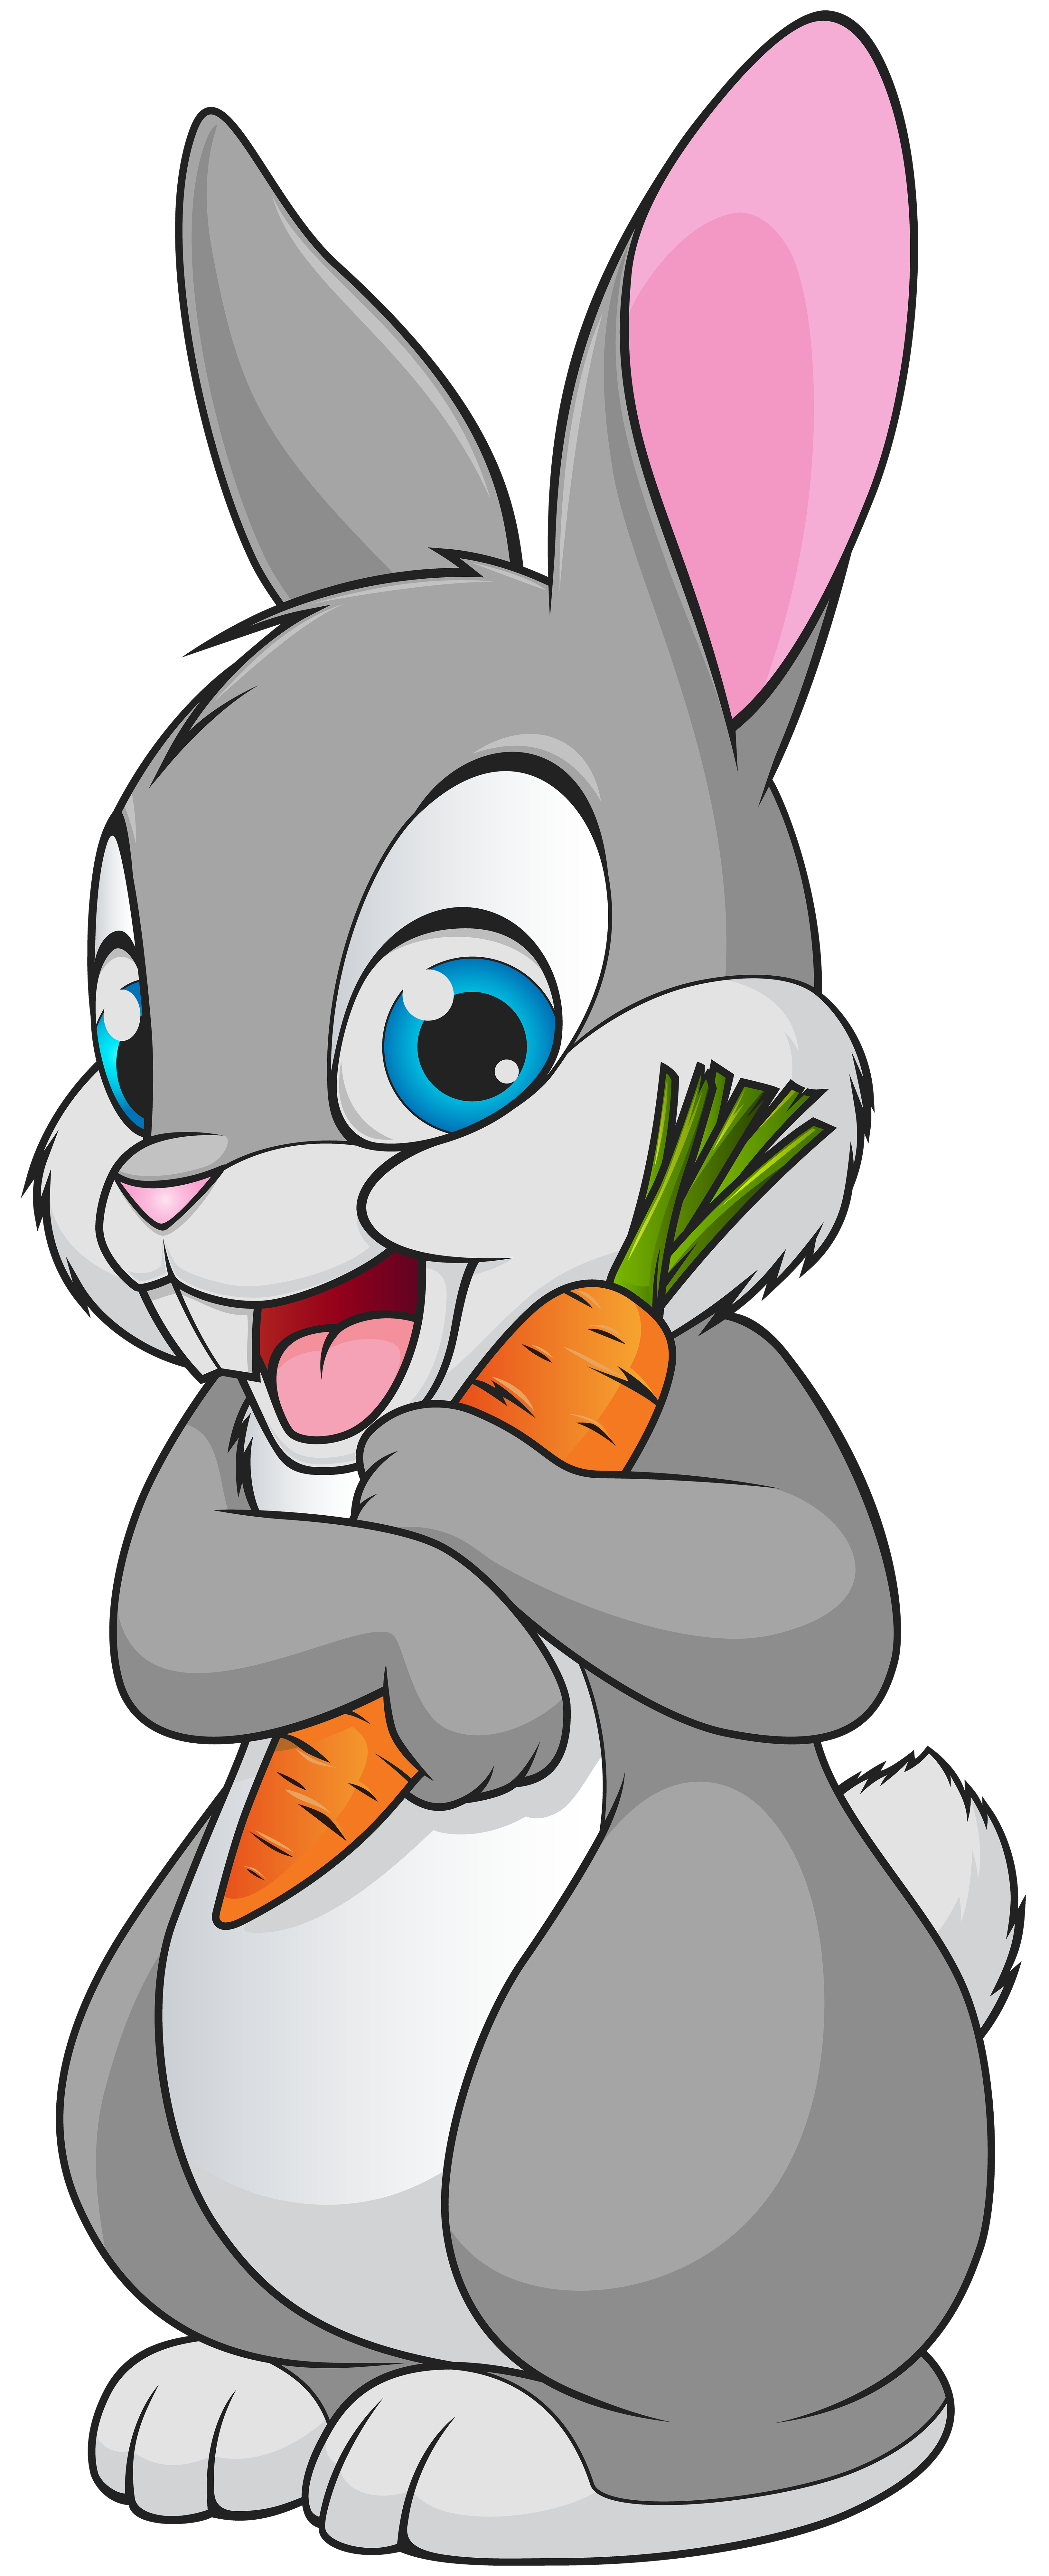 Cute Bunny Cartoon Transparent Clip Art Image​ | Gallery Yopriceville -  High-Quality Free Images and Transparent PNG Clipart